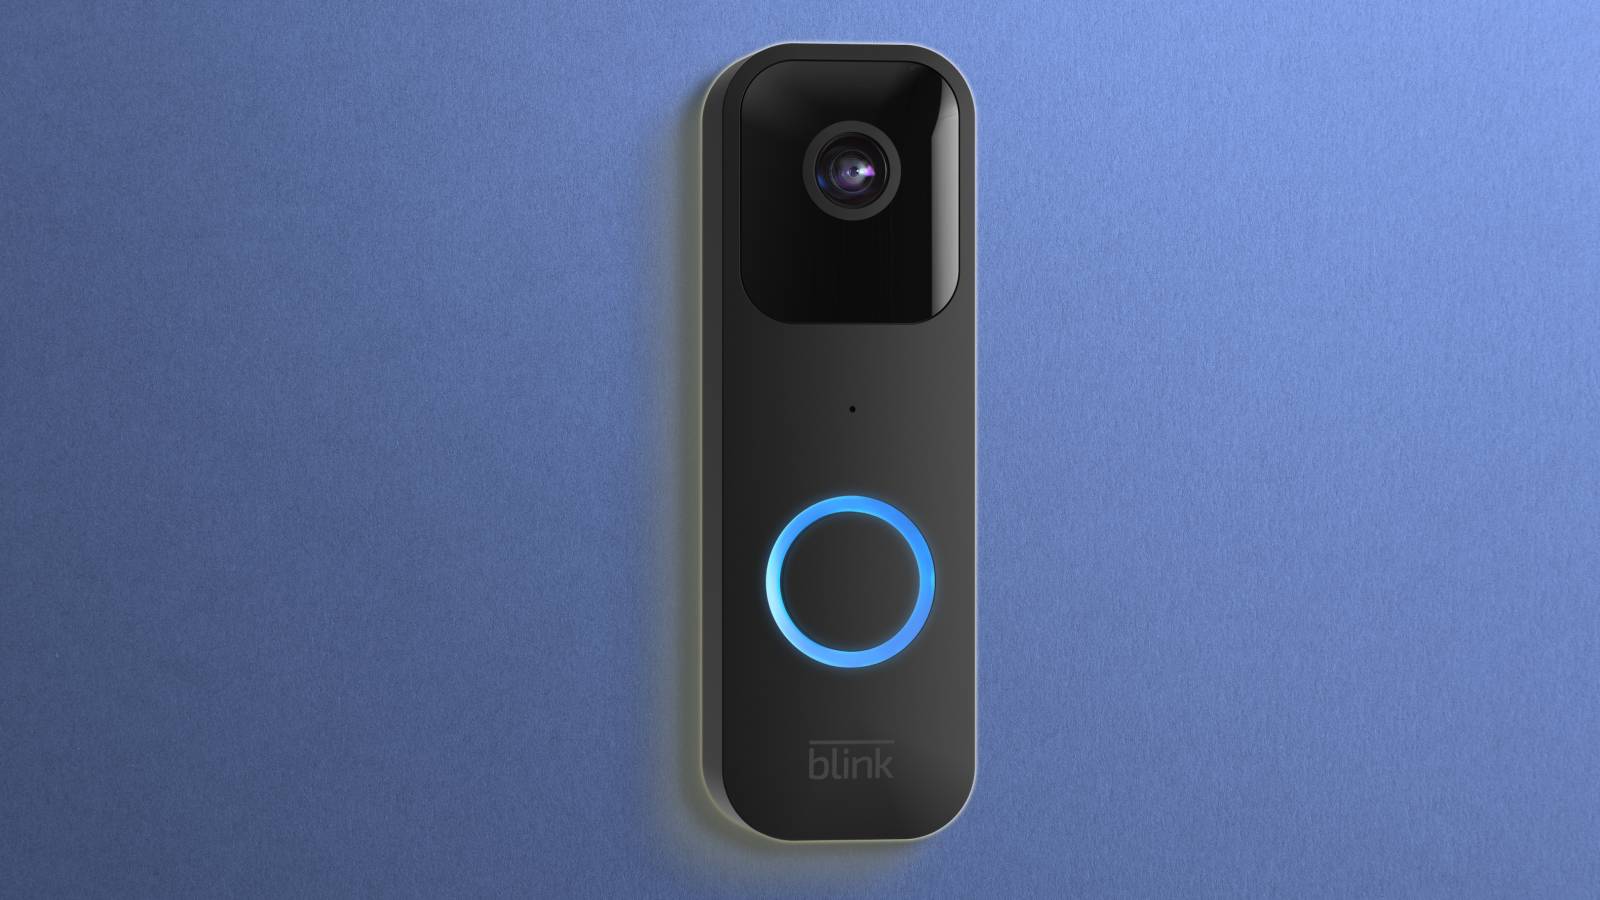 Don’t Miss Out: Blink Video Doorbell Now Available at Unbeatable 42% Discount on Amazon!